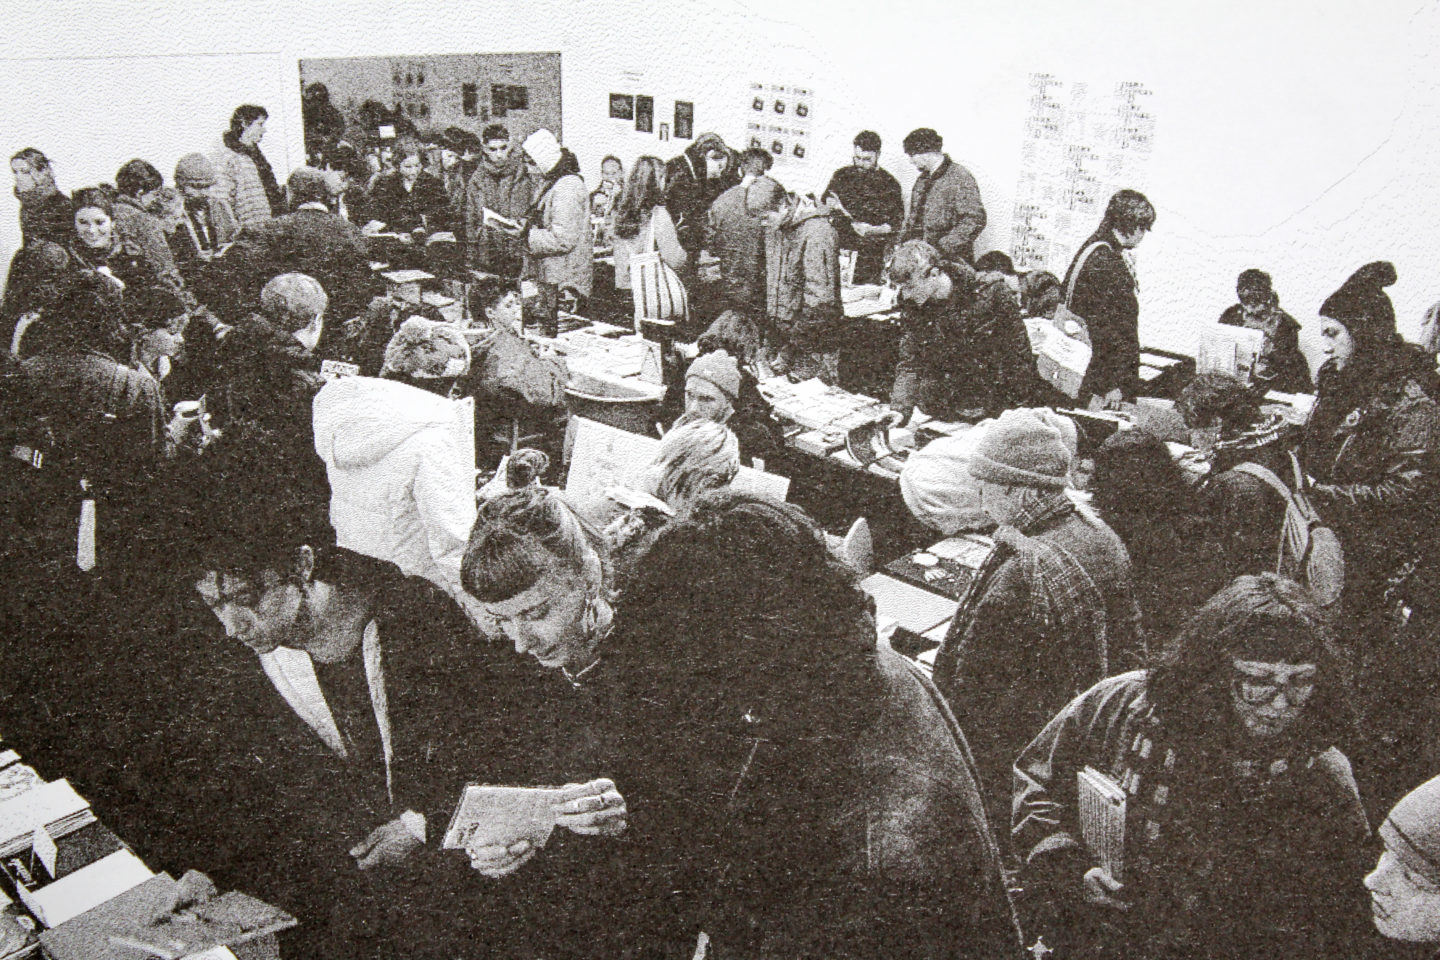 A black and white grainy image of a crowd of people standing around tables holding books and zines